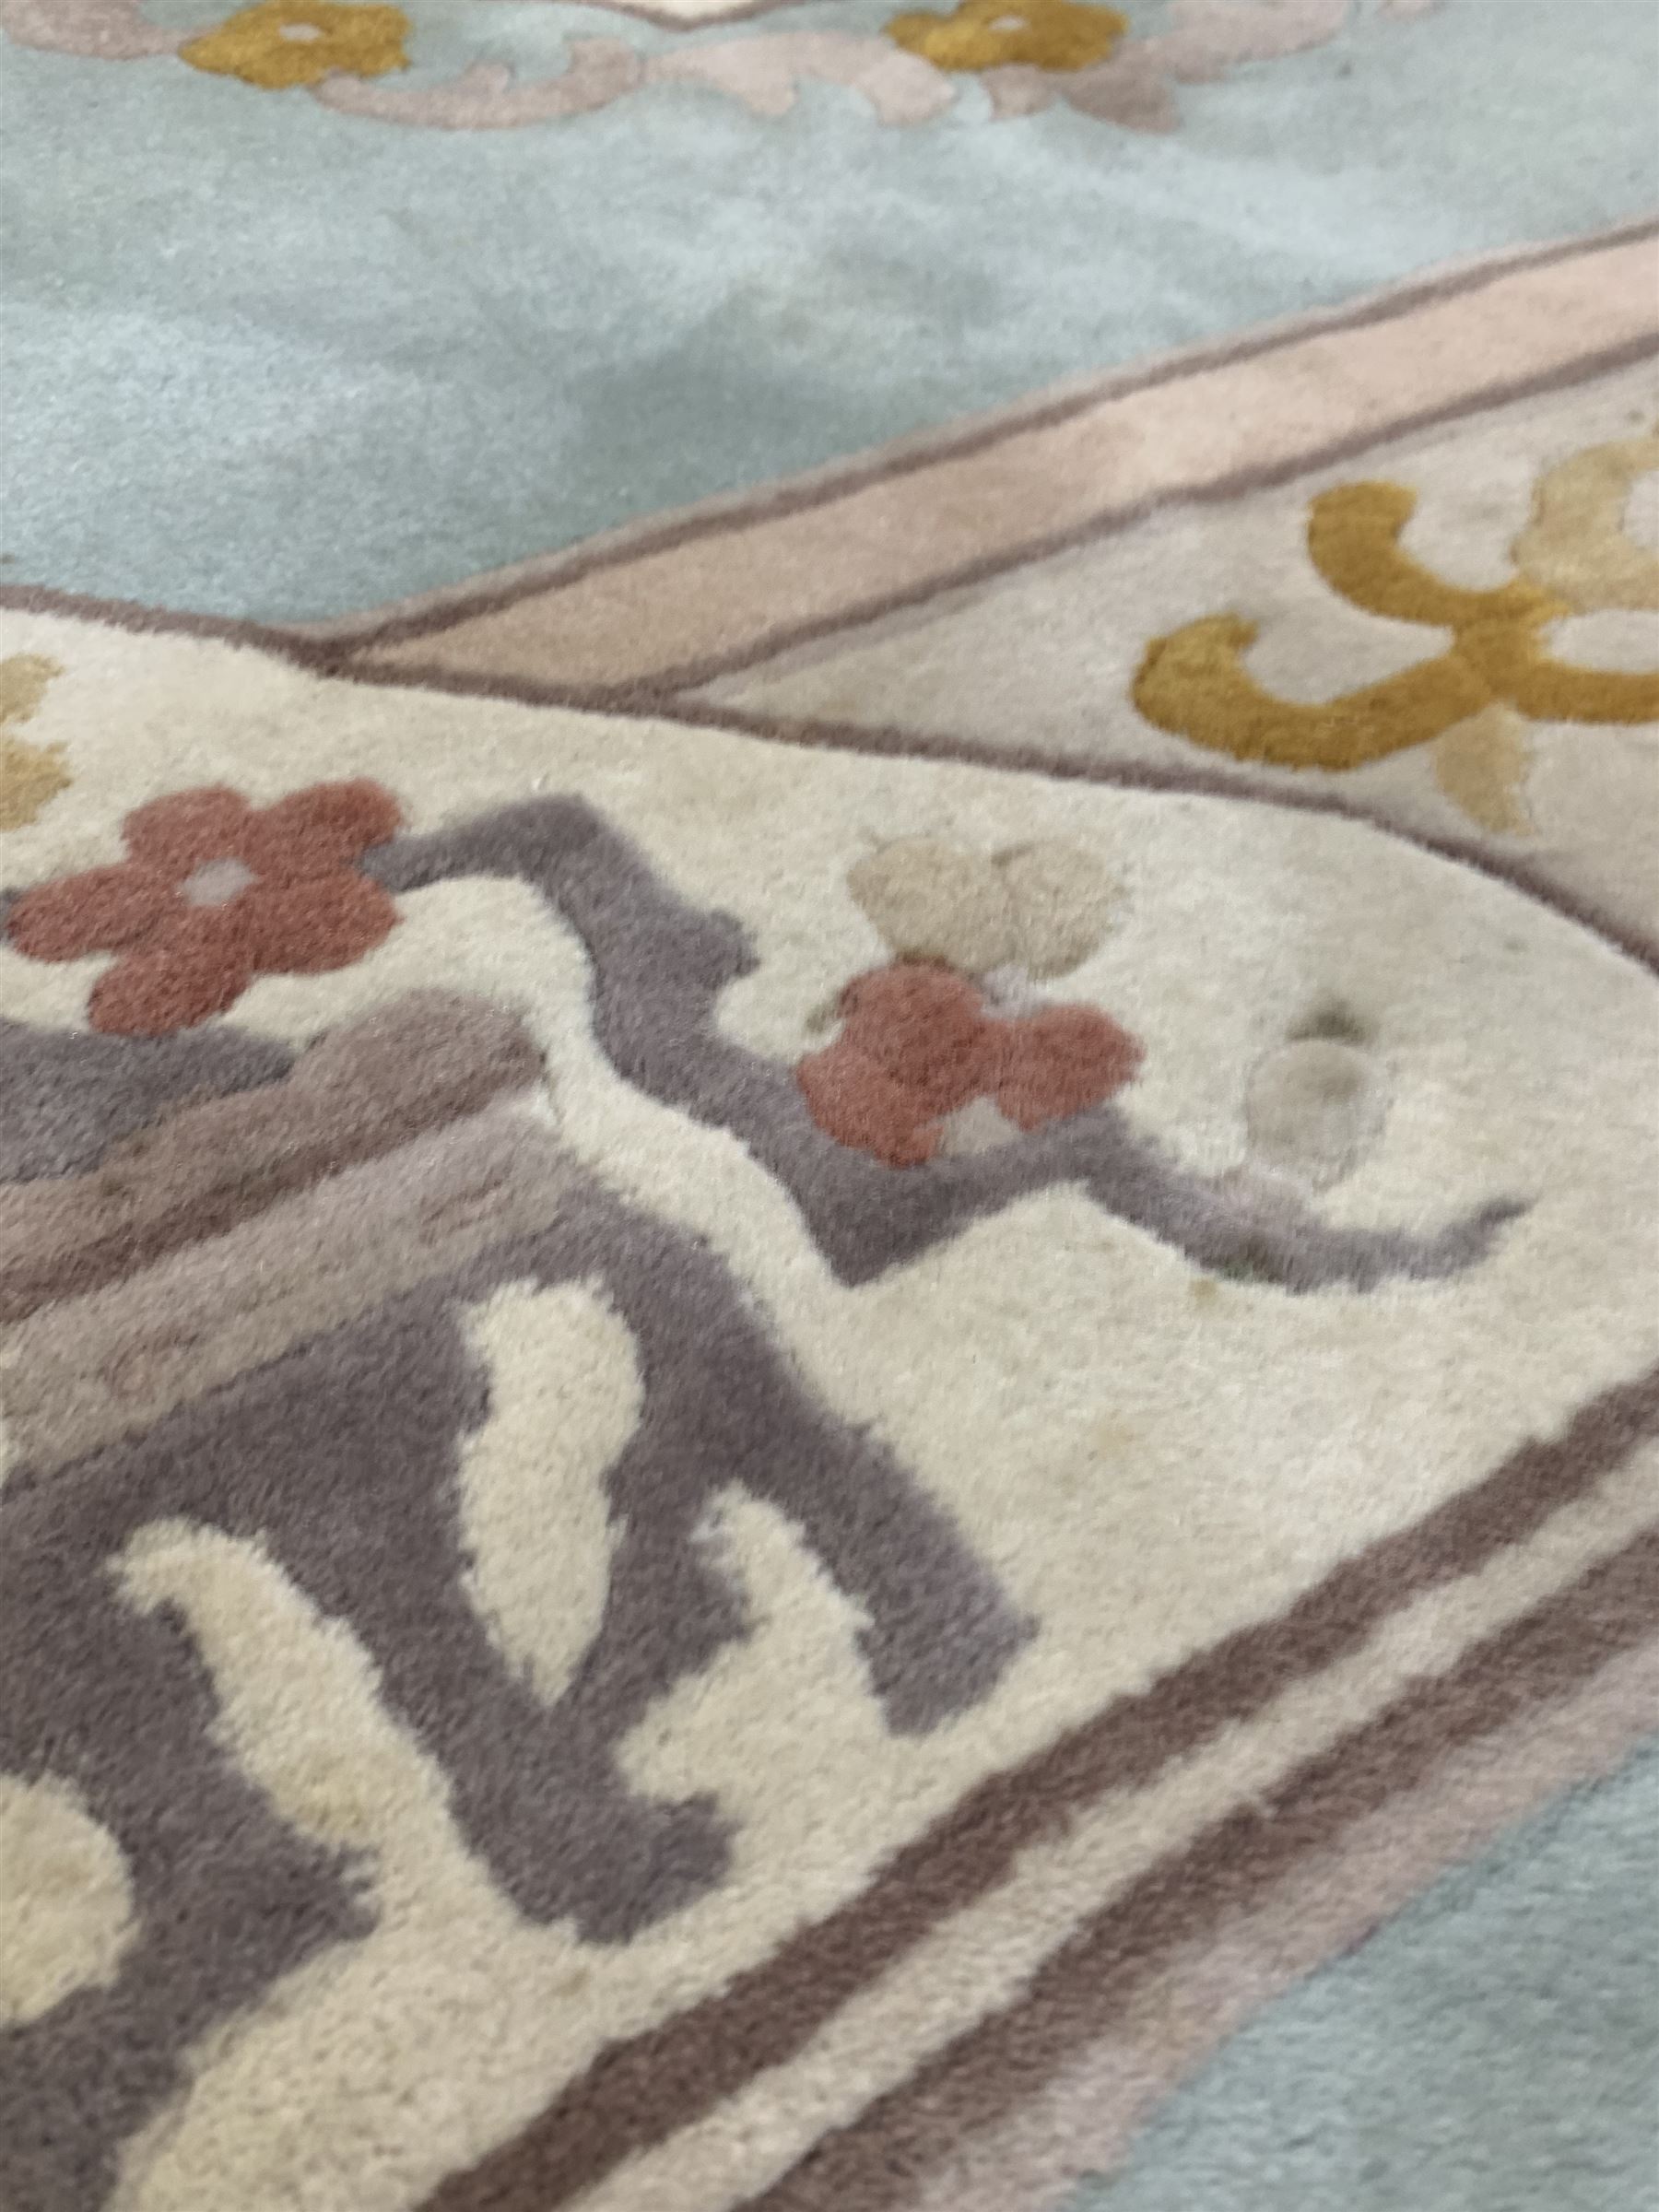 Chinese washed woollen carpet - Image 2 of 4